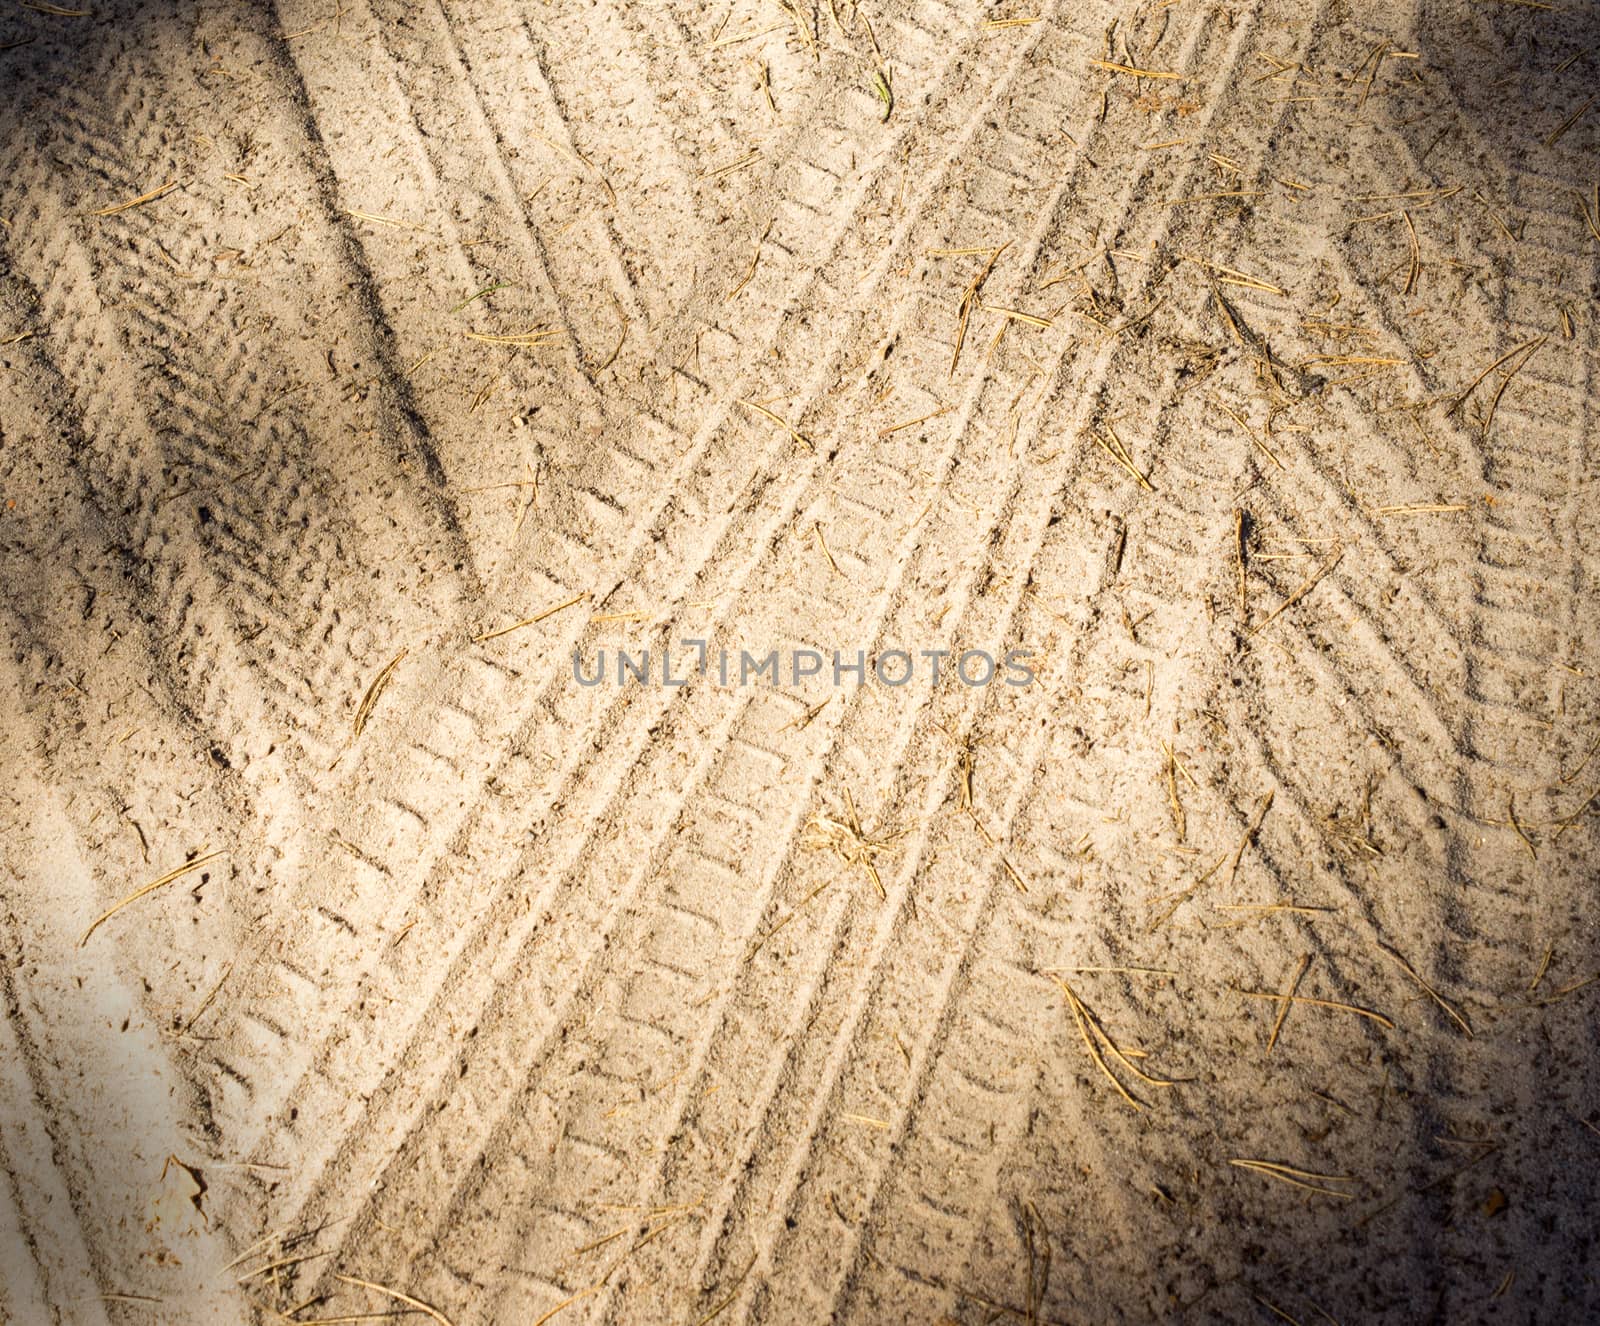 Detail of tyre tracks in sand. For your commercial and editorial use.